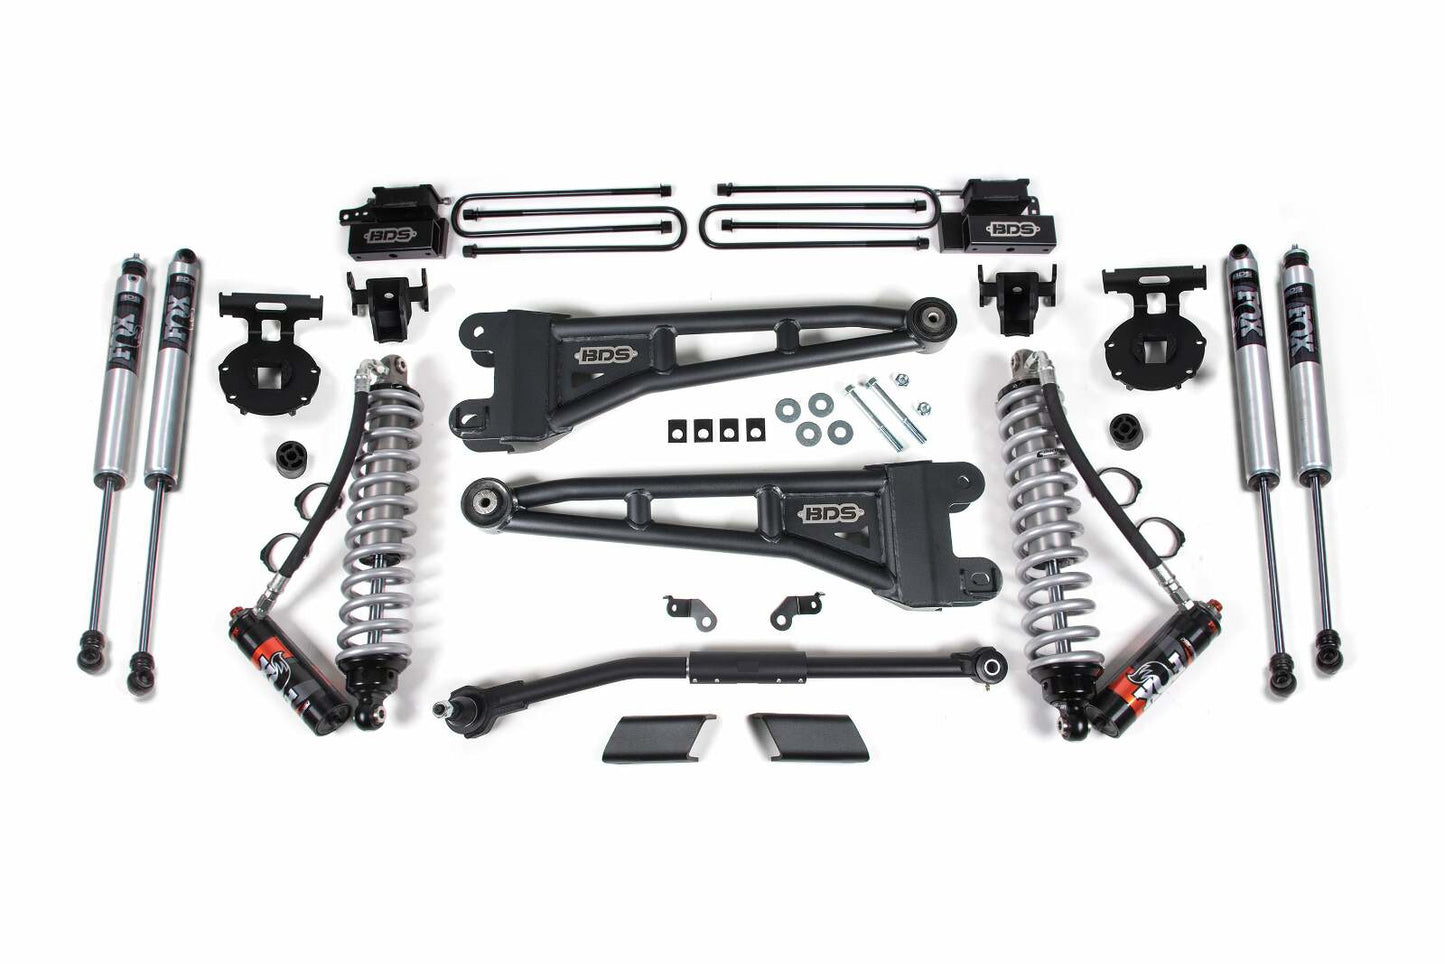 2020-2022 Ford F450 4wd 3" Radius Arm Suspension Lift Kit, 1" Rear Lift, Block, Diesel - Fox 2.5 PES C/O Front, Fox 2.0 IFP PS Aux Front, Fox 2.0 IFP PS Rear